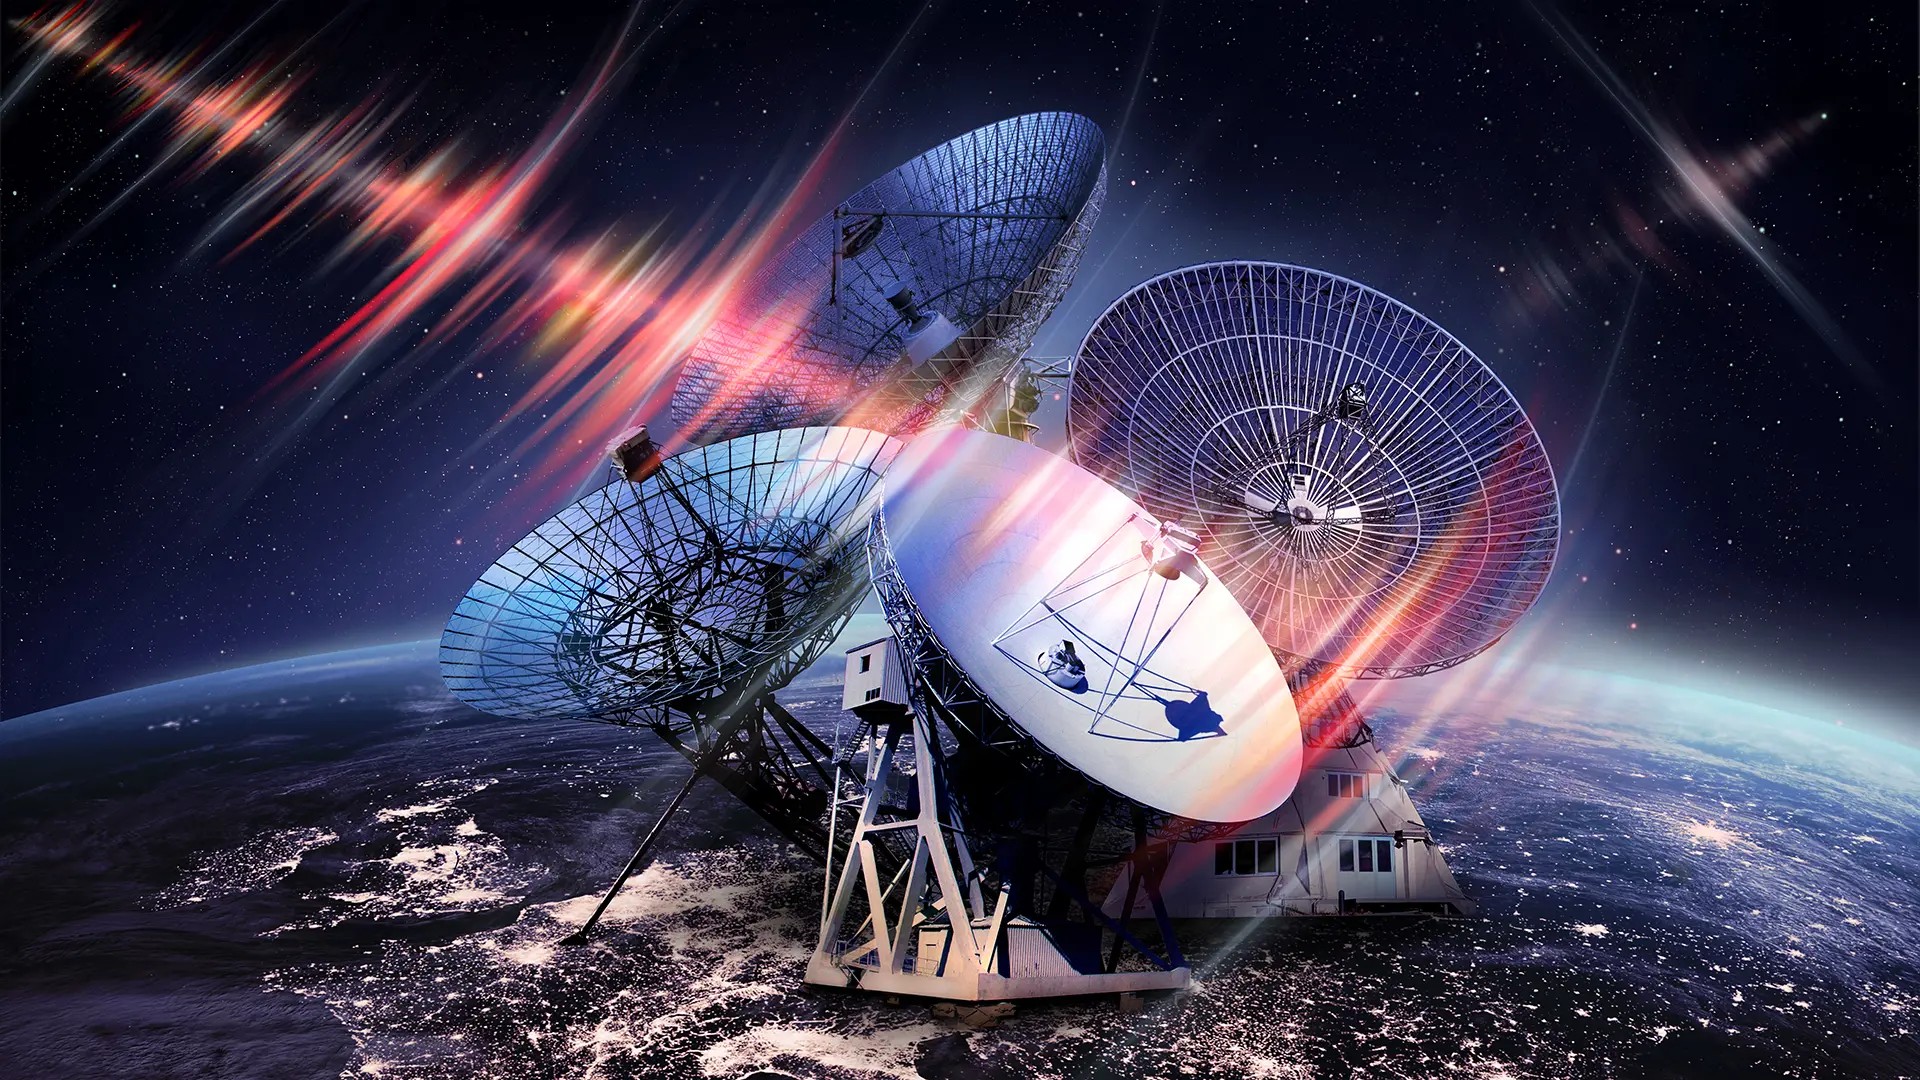 Four radio telescopes collected many bright fast radio bursts from one repeating source – many more than expected. Illustration: Daniëlle Futselaar/artsource.nl